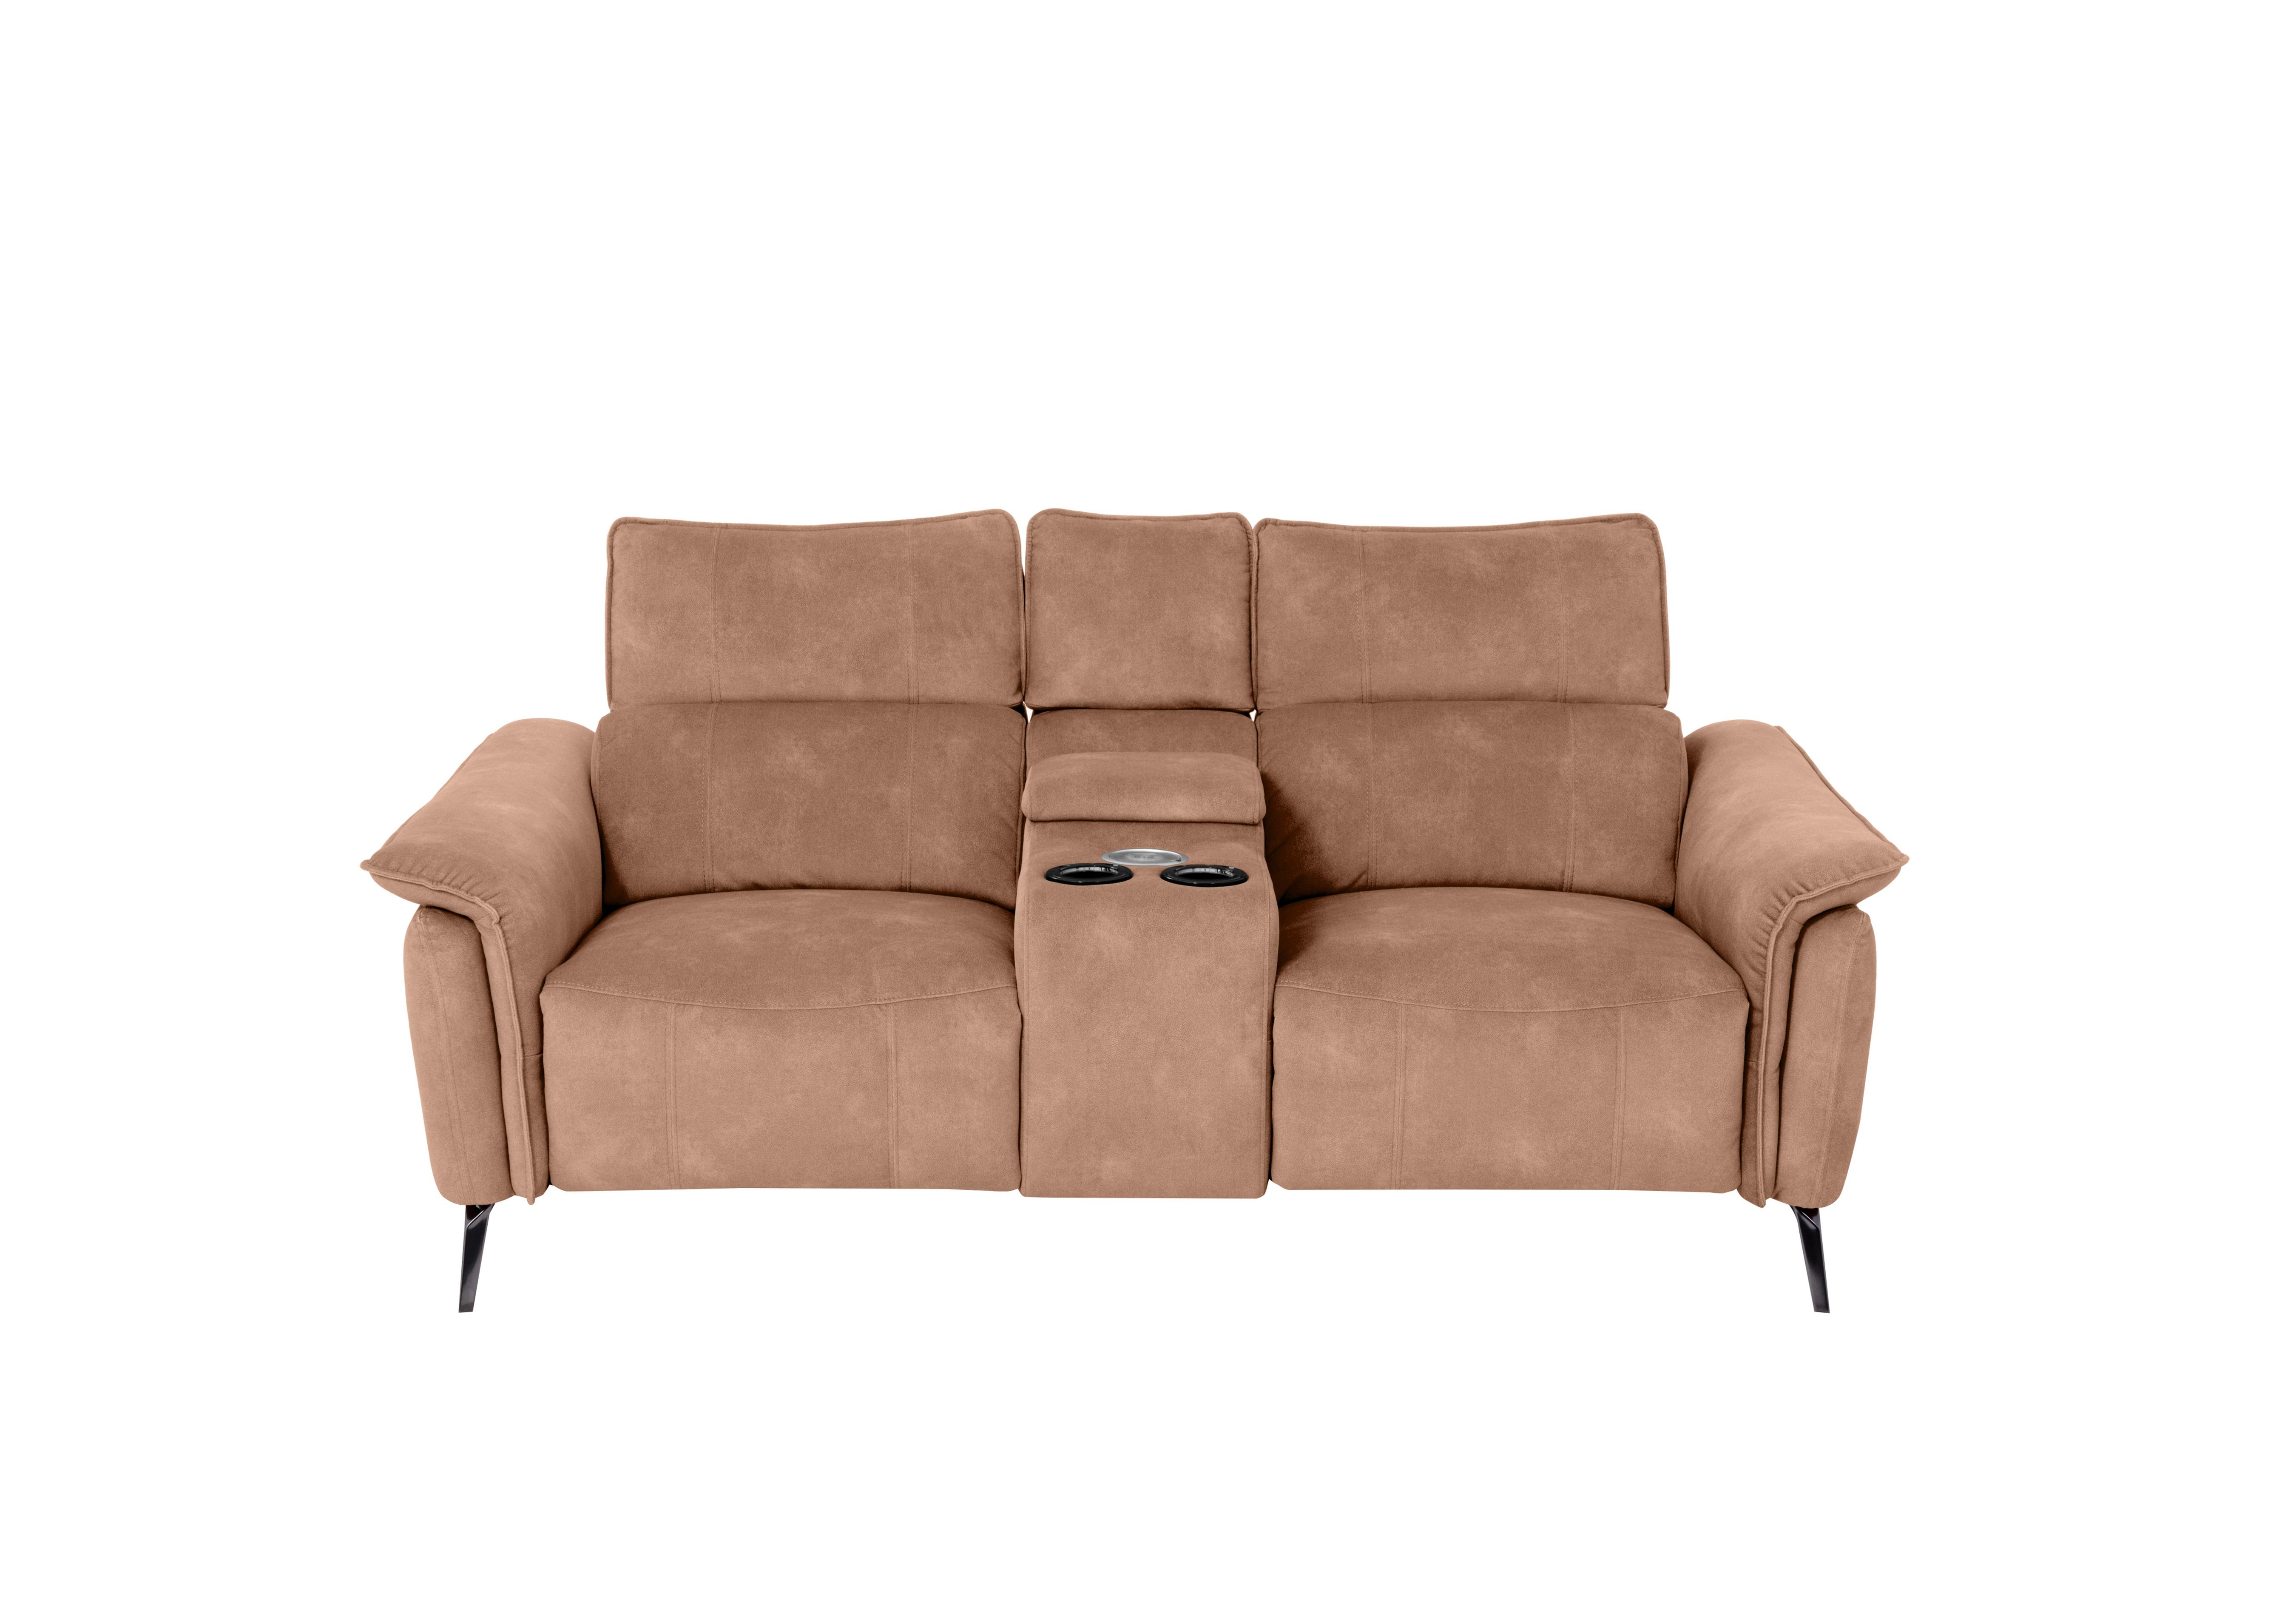 Jude 2 Seater Fabric Power Recliner Sofa with Smart Console Unit and Power Telescopic Headrests in Sand Dexter 07 43507 on Furniture Village